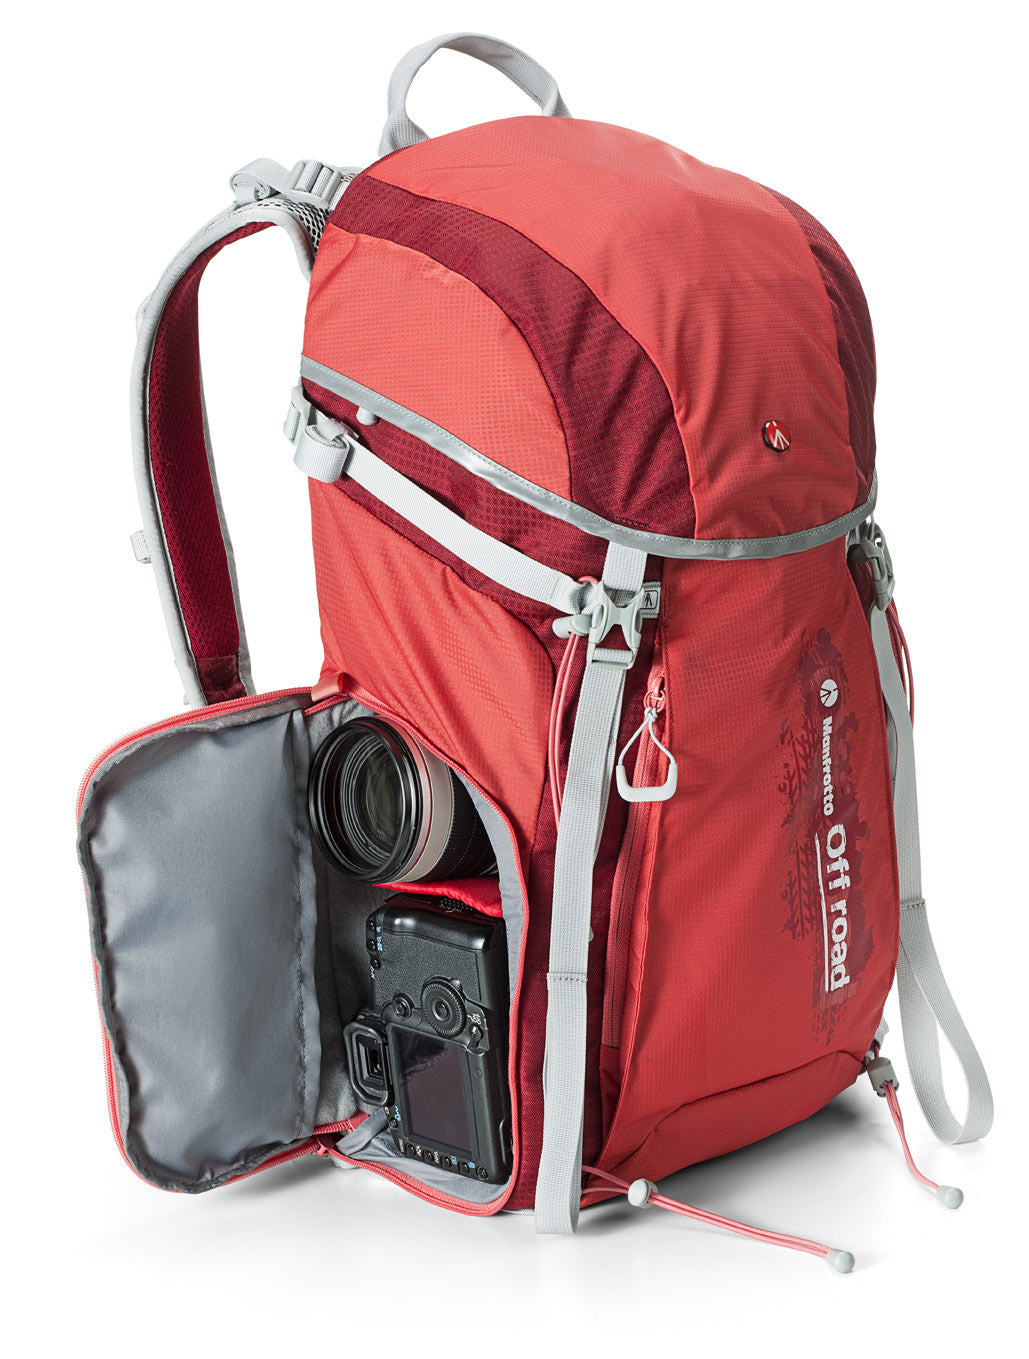 Manfrotto Off Road Hiking Backpack Red, bags backpacks, Manfrotto - Pictureline  - 6